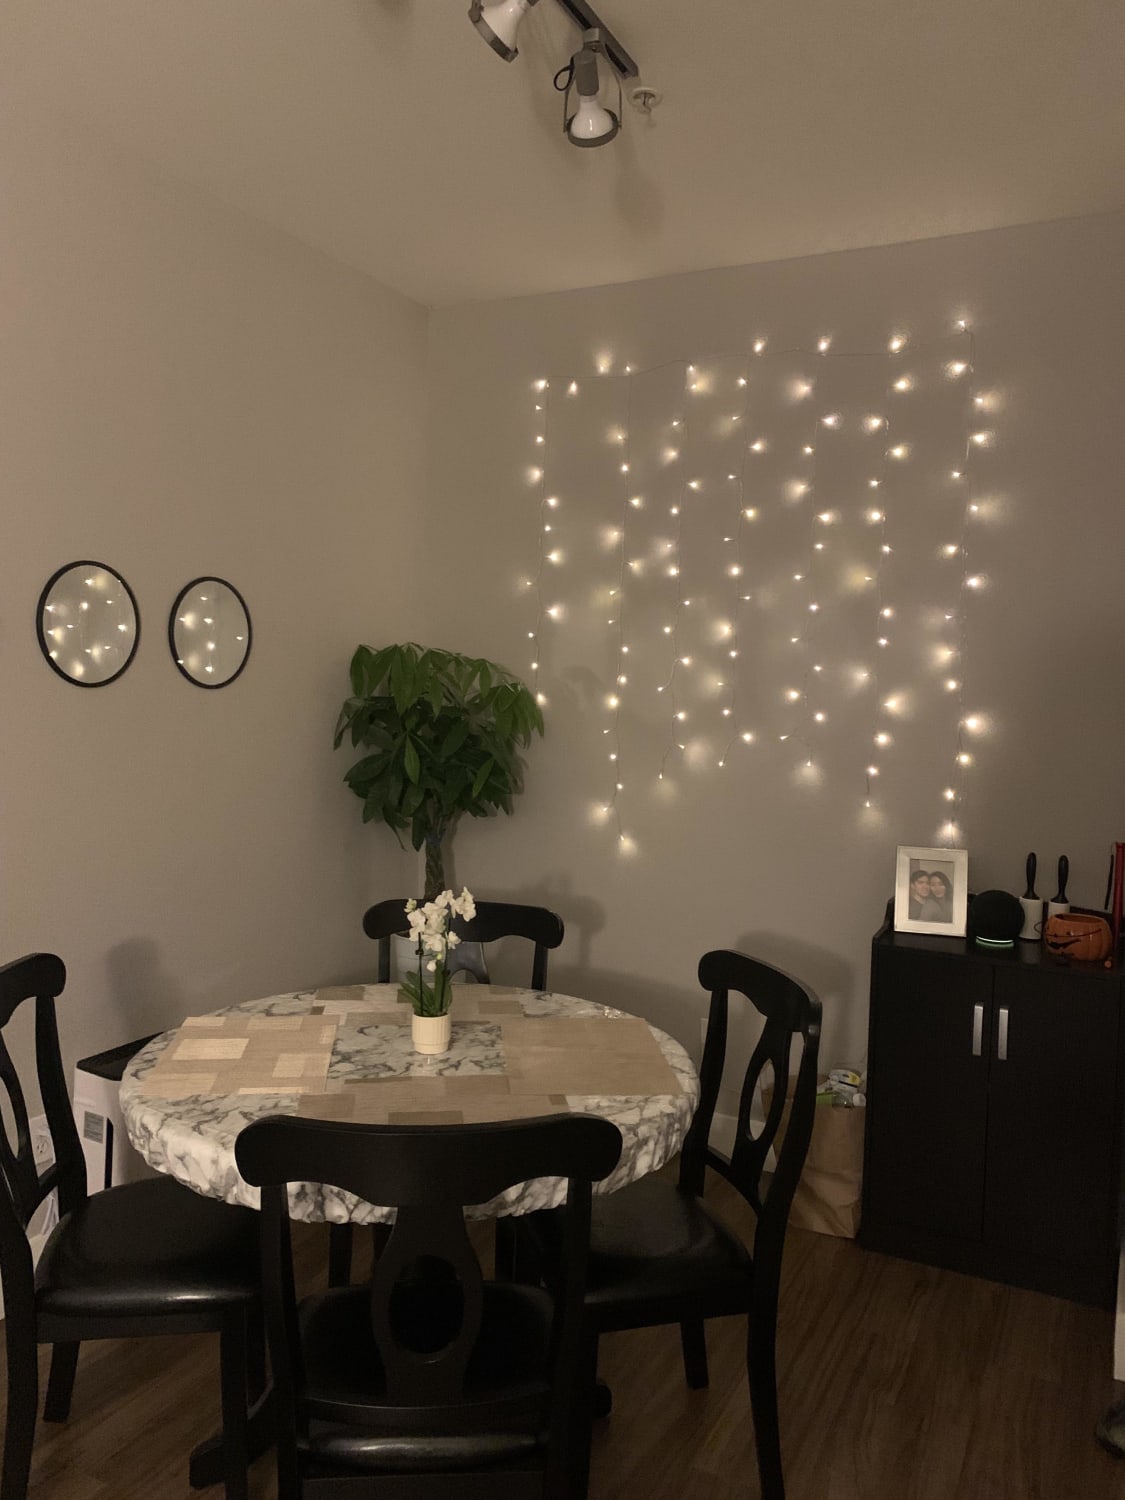 I absolutely love our dining area